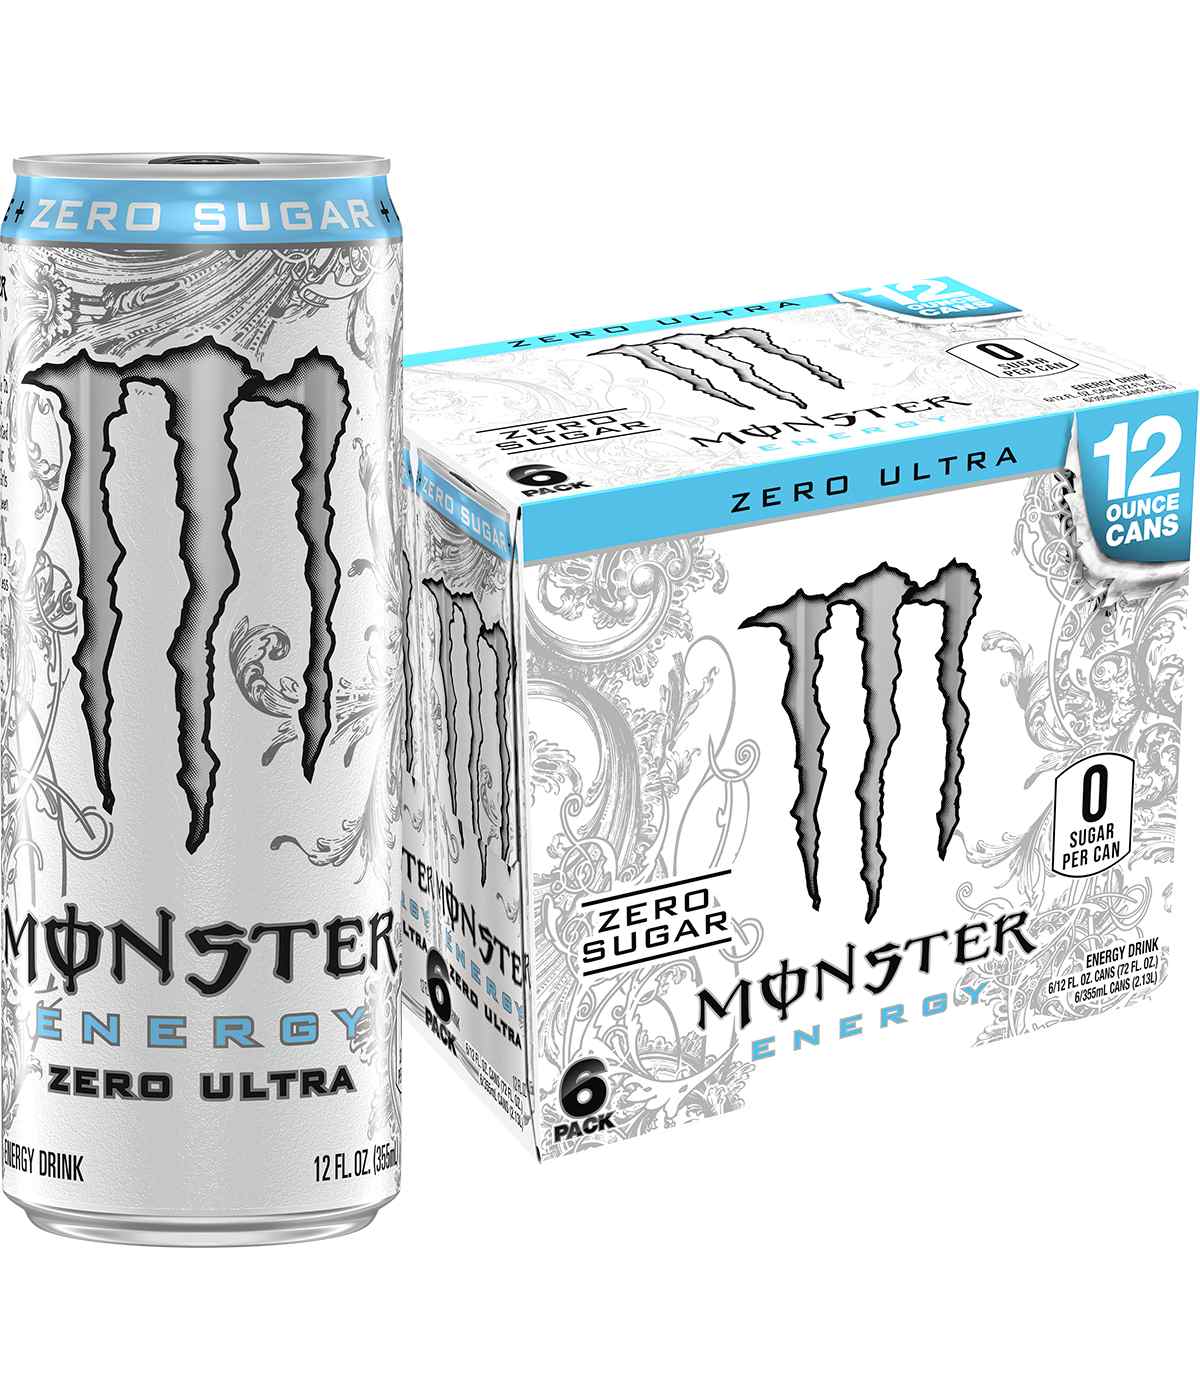 Monster Energy Zero Ultra Sugar Free Energy Drink 12 oz Cans; image 3 of 3